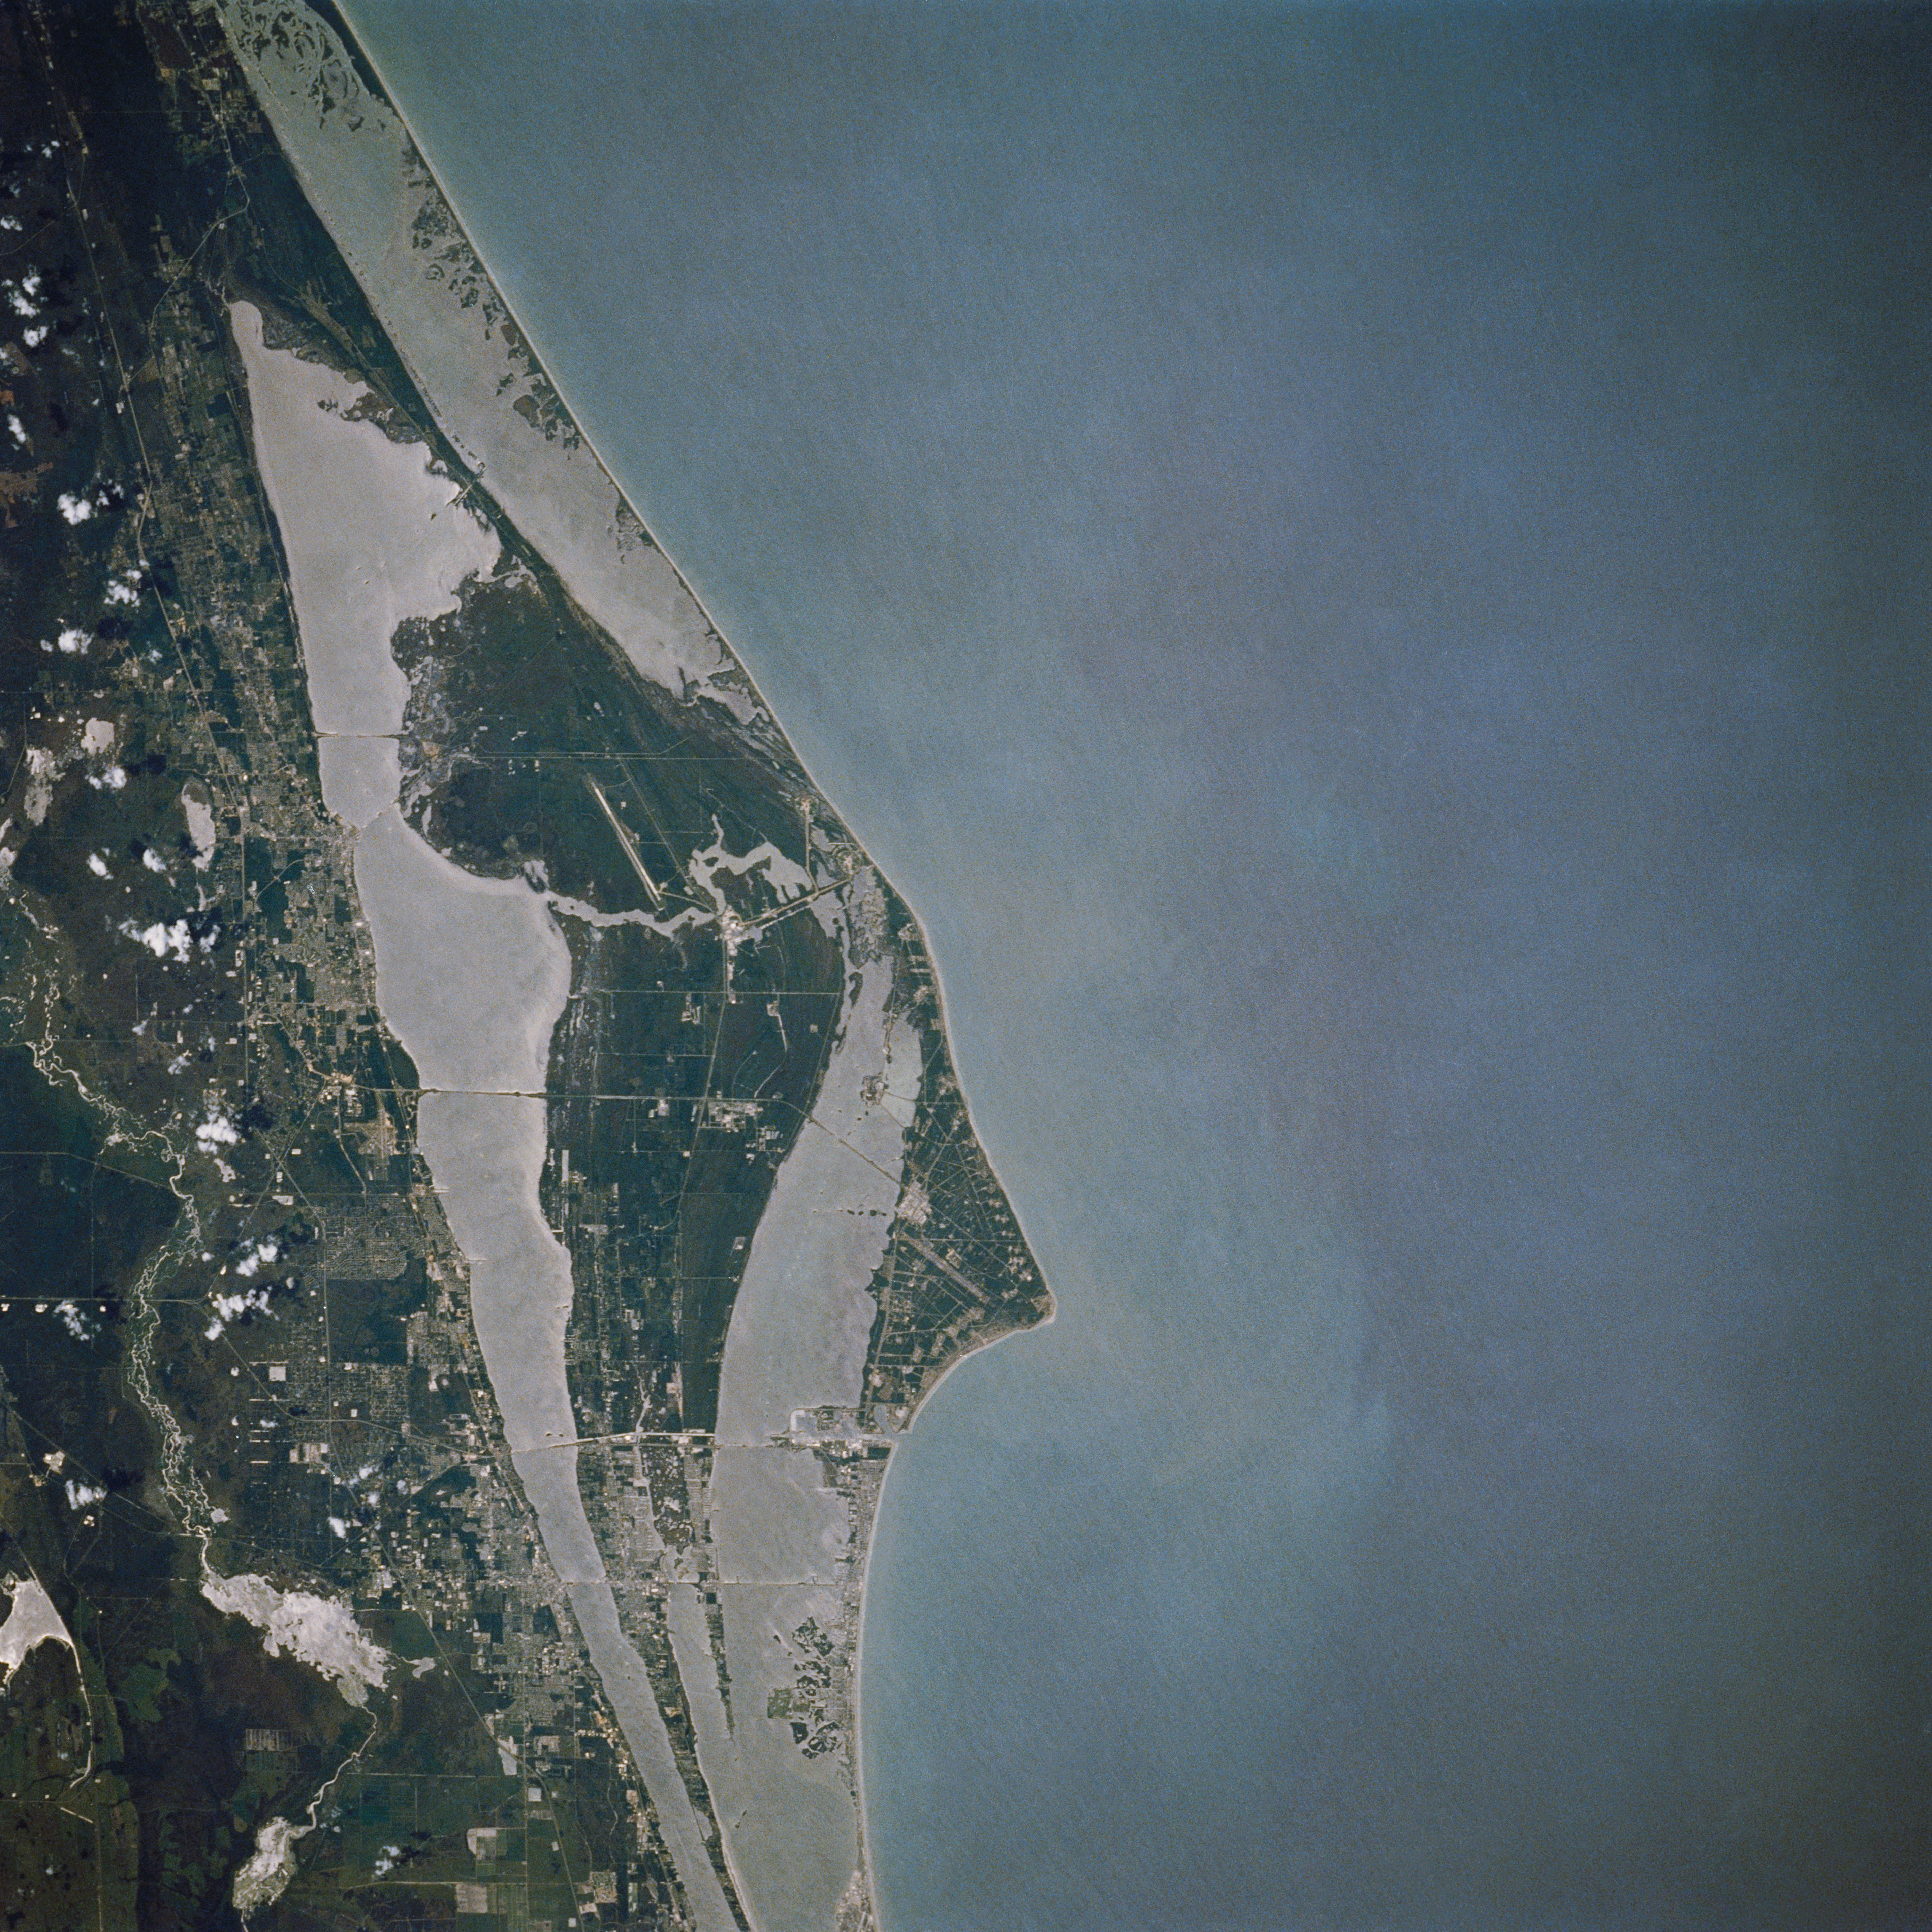 STS-30 crew Earth observation photograph of the Cape Canaveral area in Florida including NASA’s Kennedy Space Center